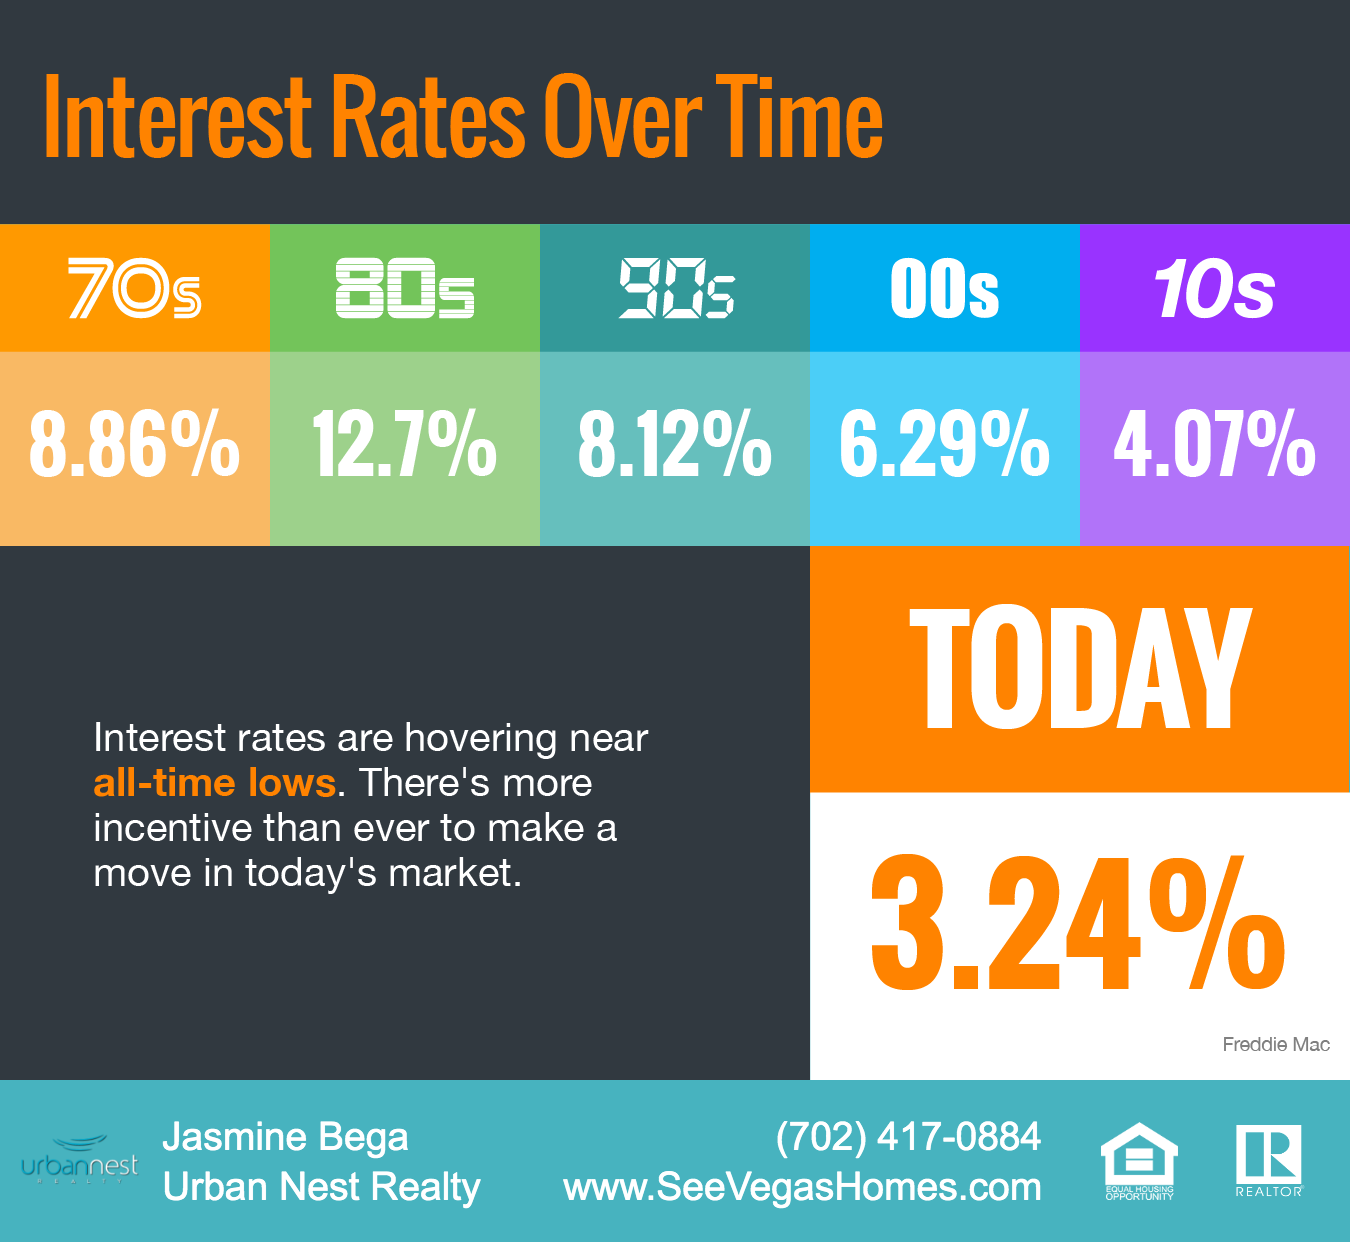 Interest Rates Hover Near Historic All-Time Lows May 2020